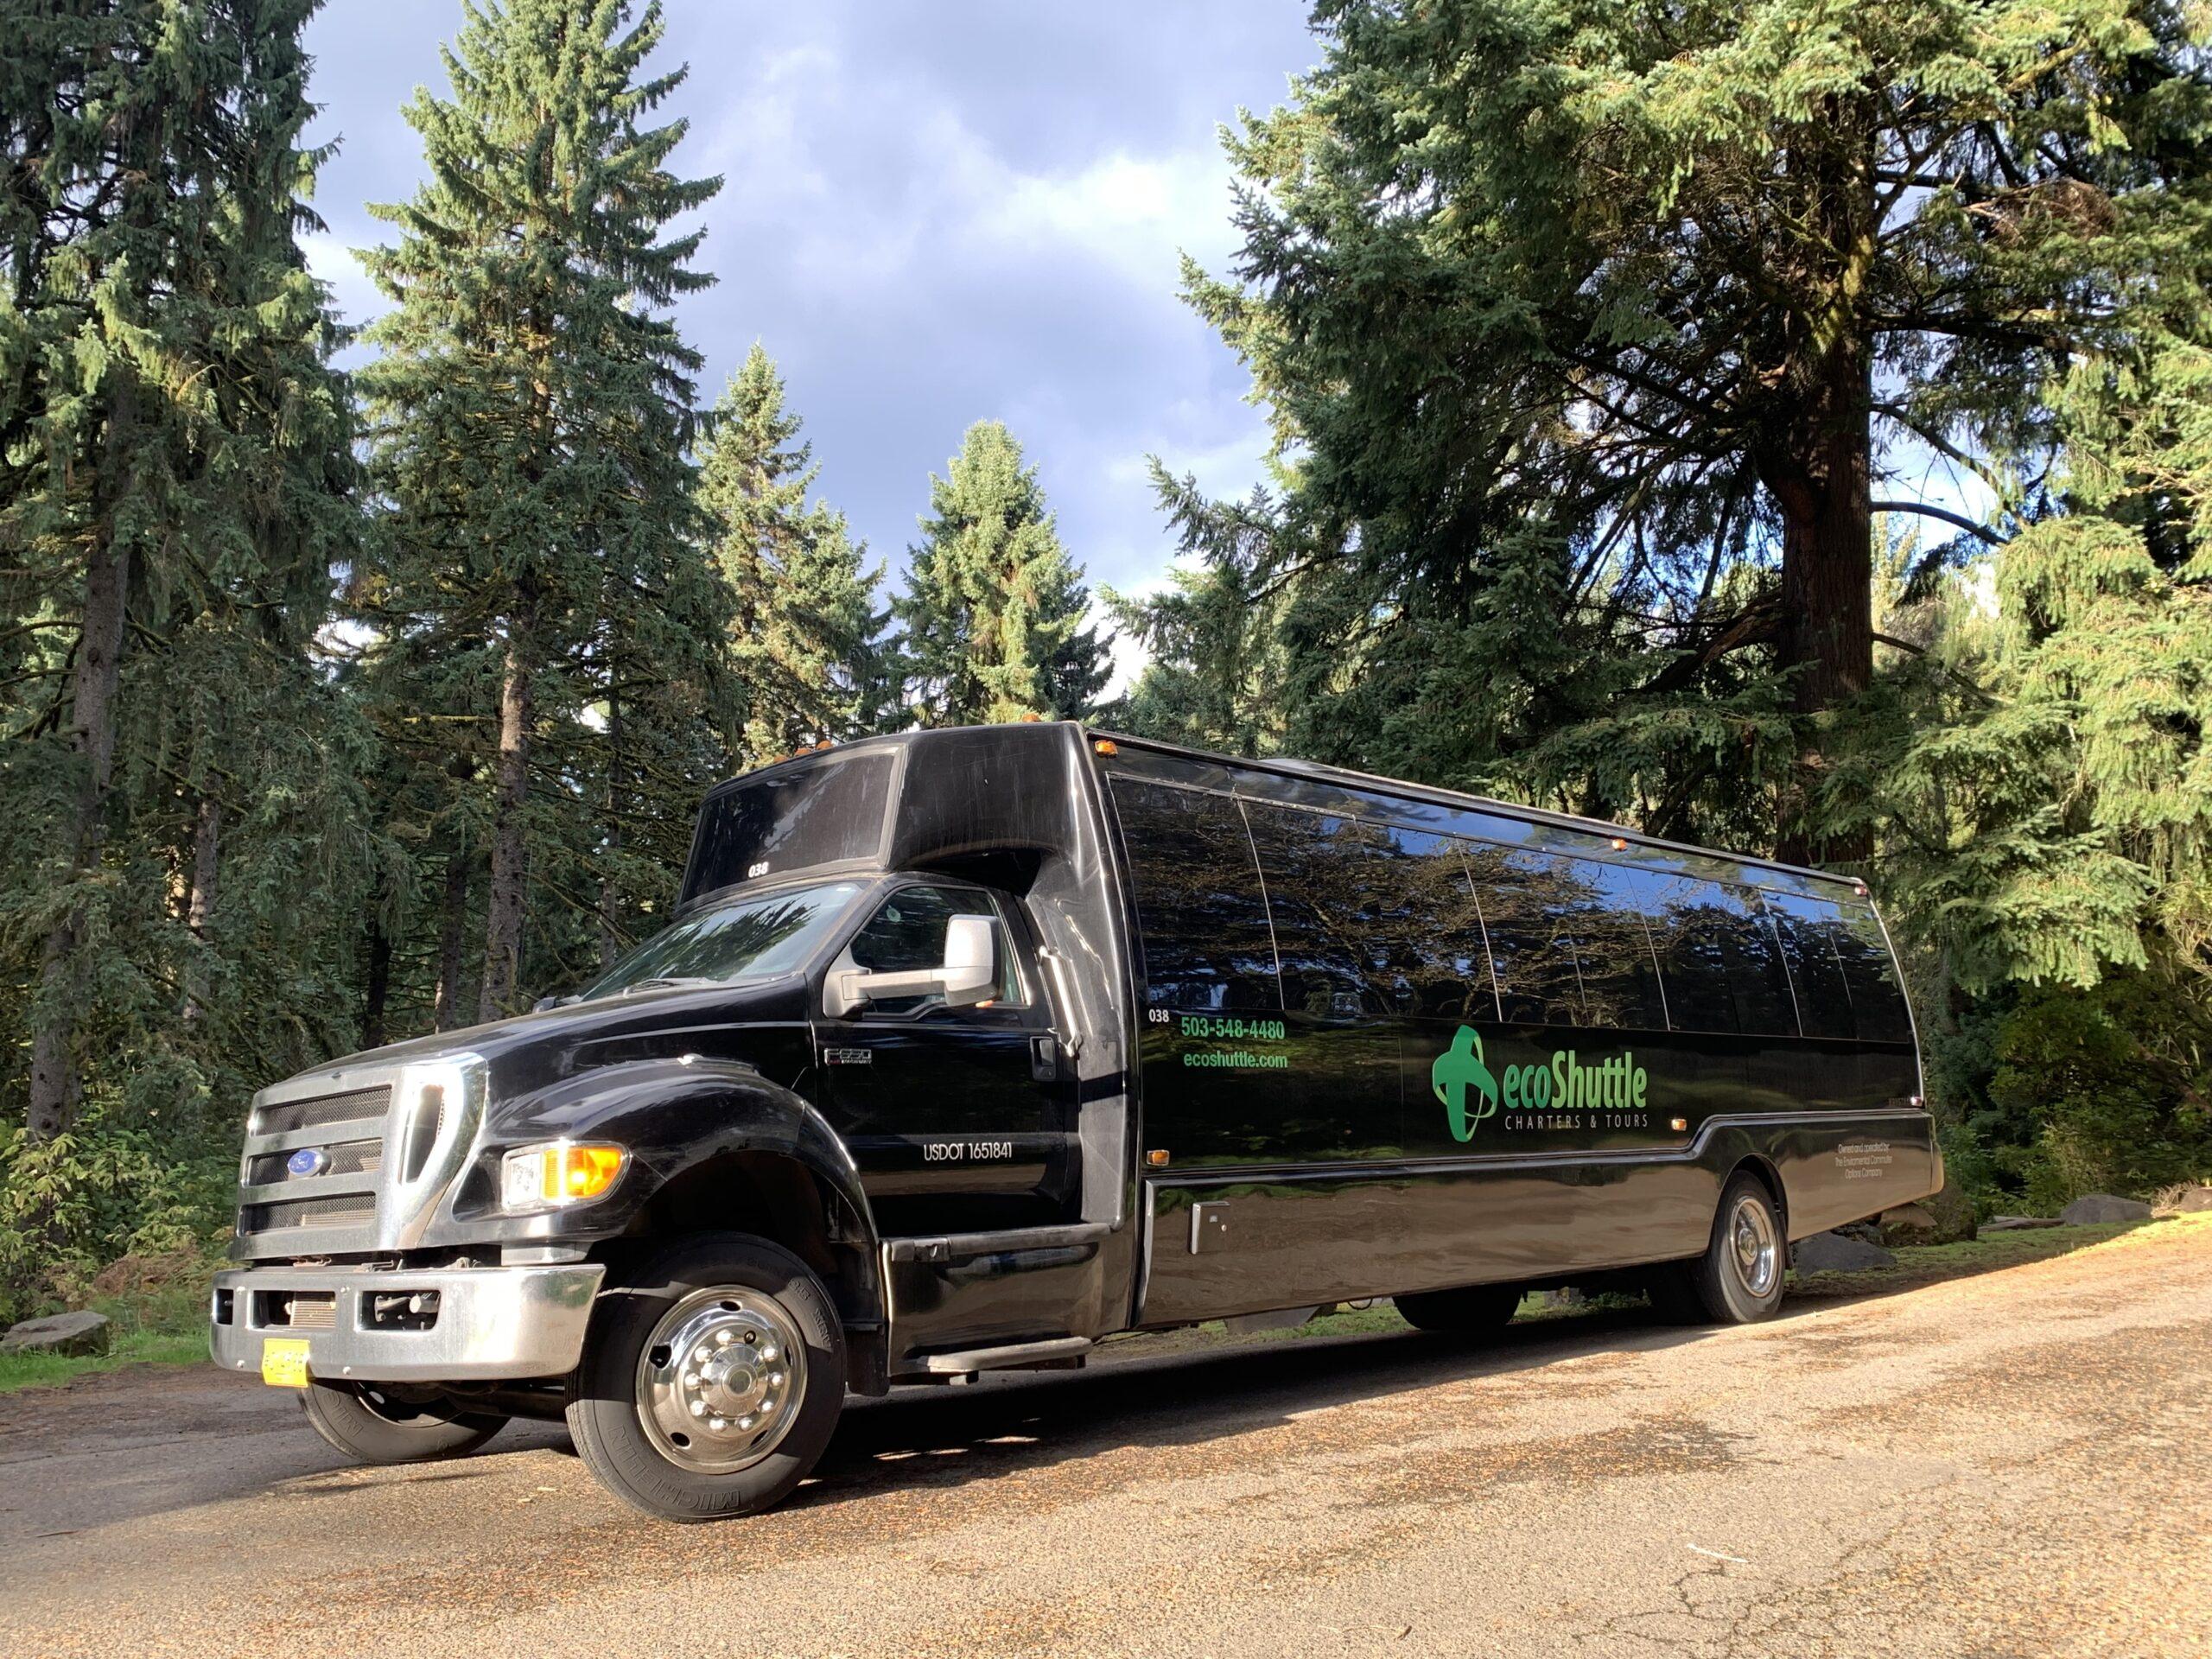 A luxury charter bus waiting on an event.